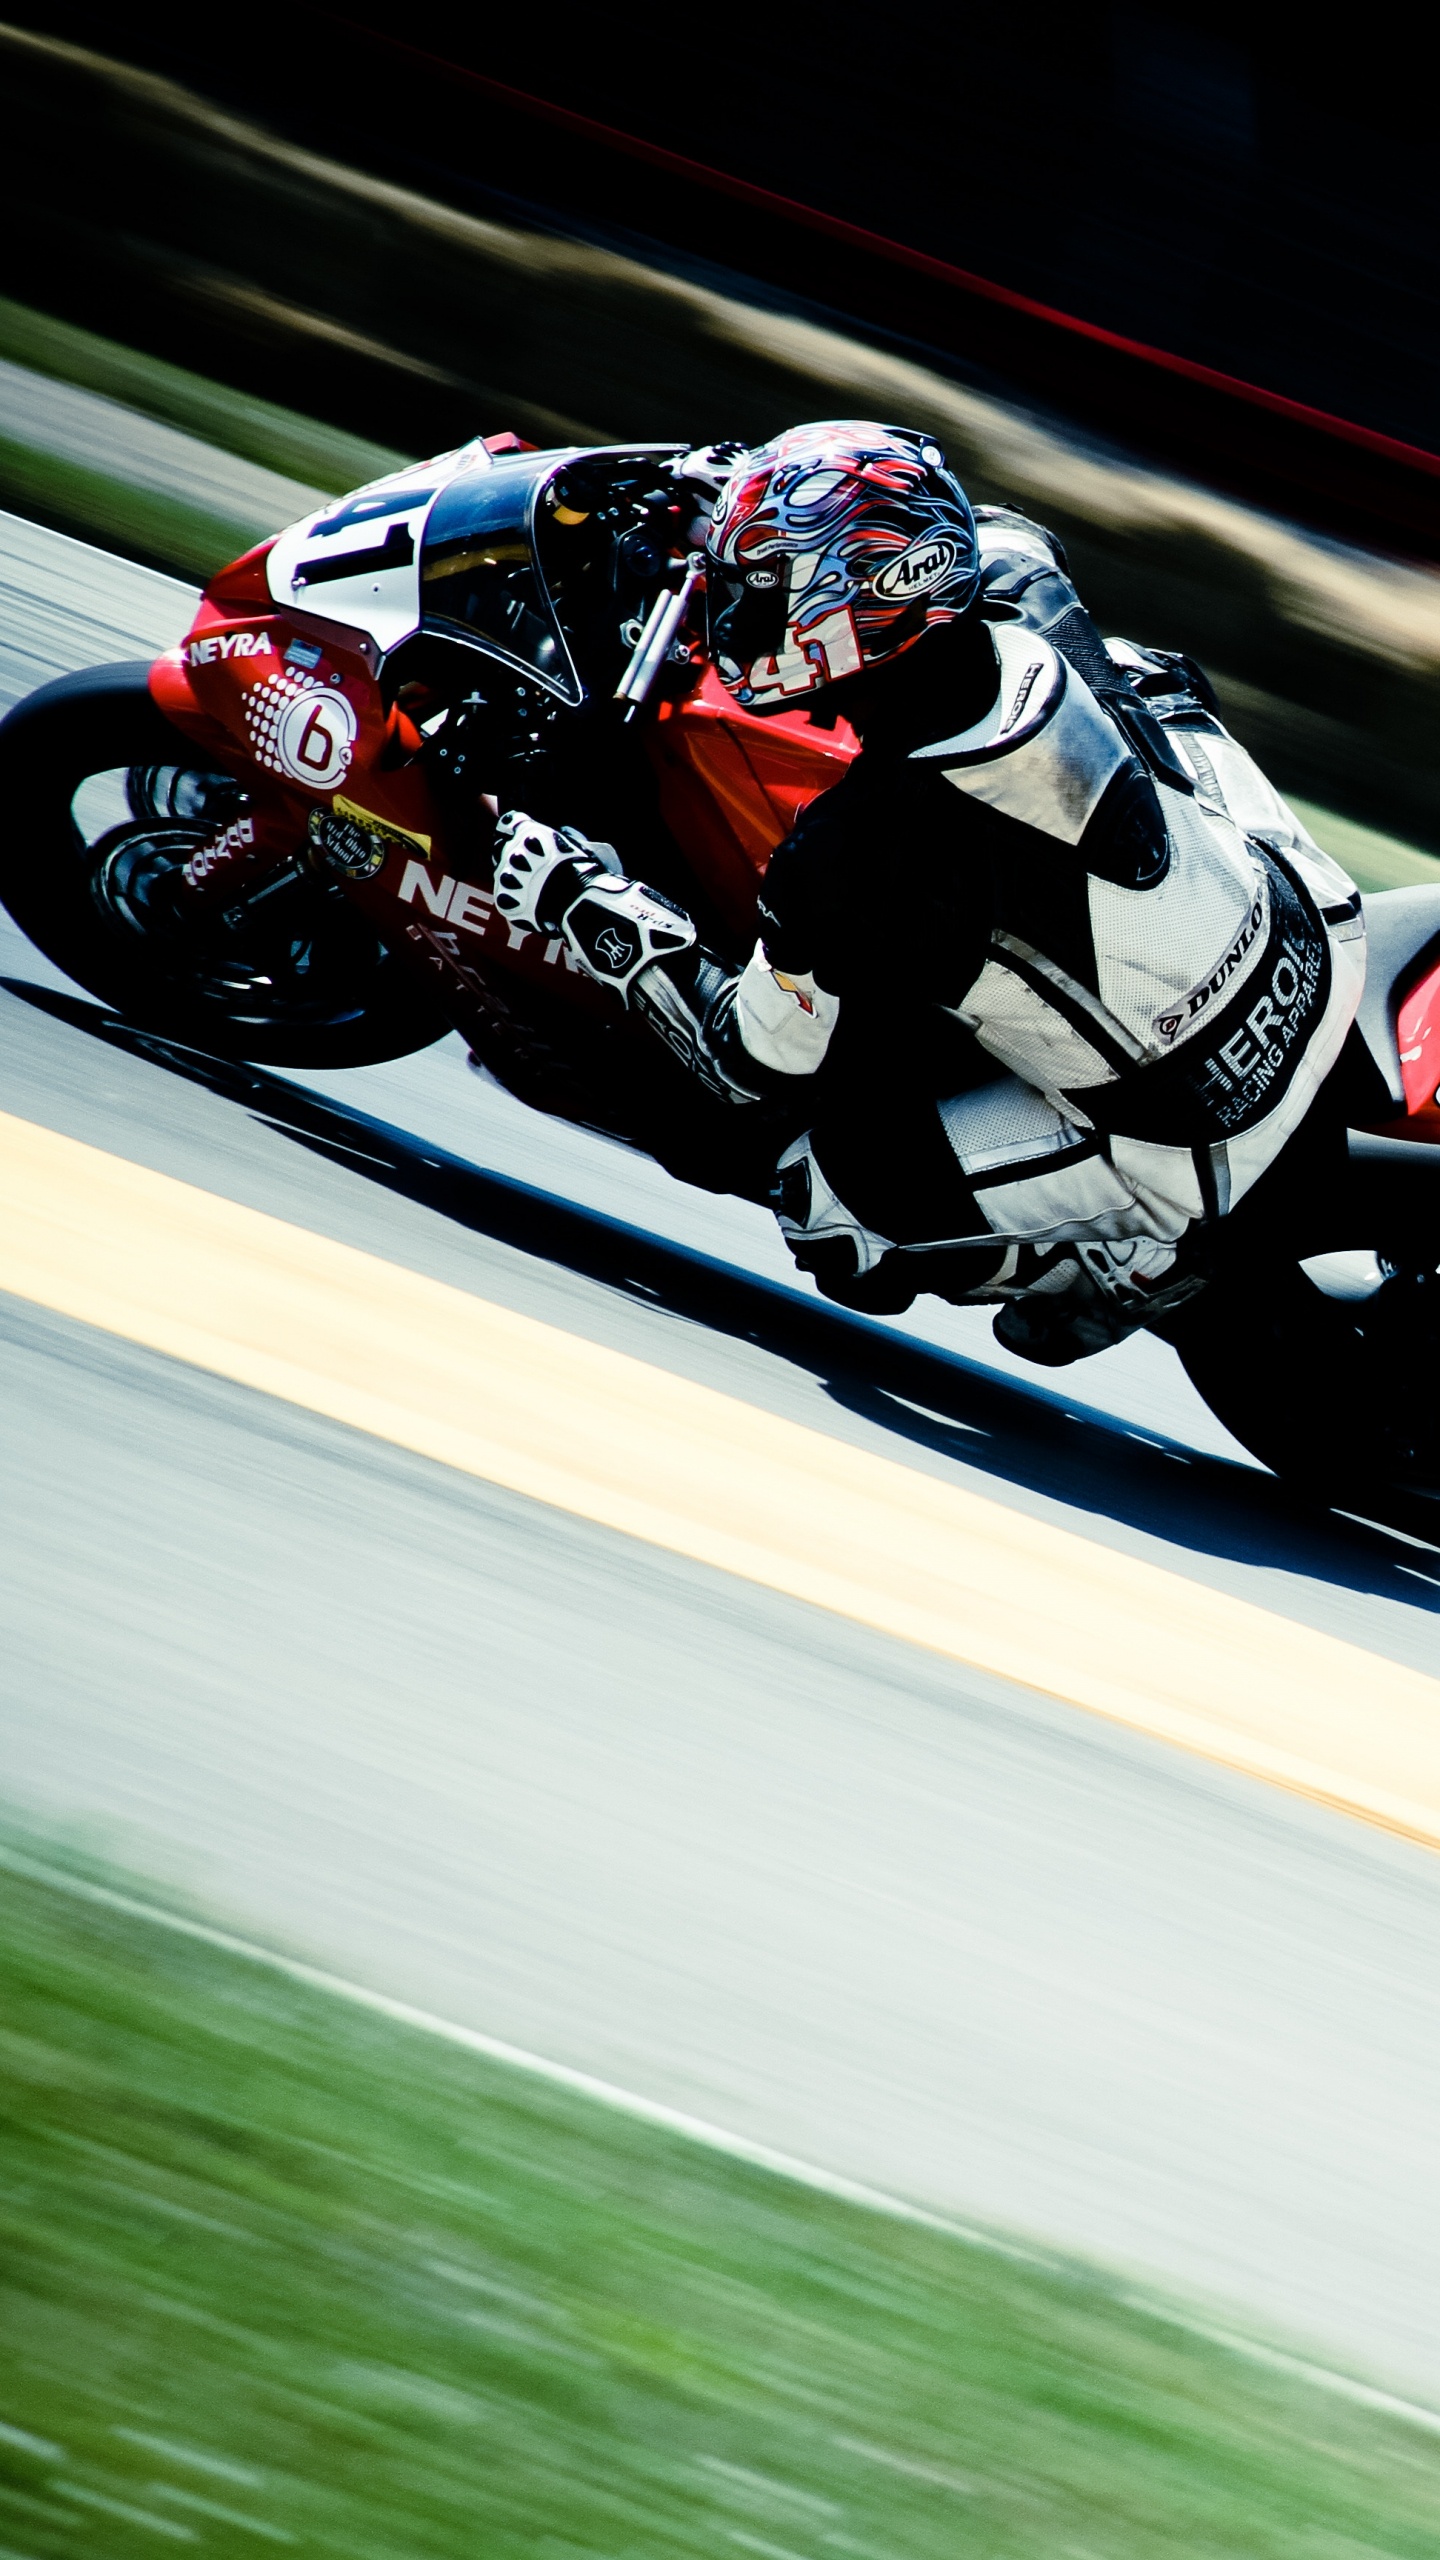 Man in Red and White Racing Suit Riding on Sports Bike. Wallpaper in 1440x2560 Resolution